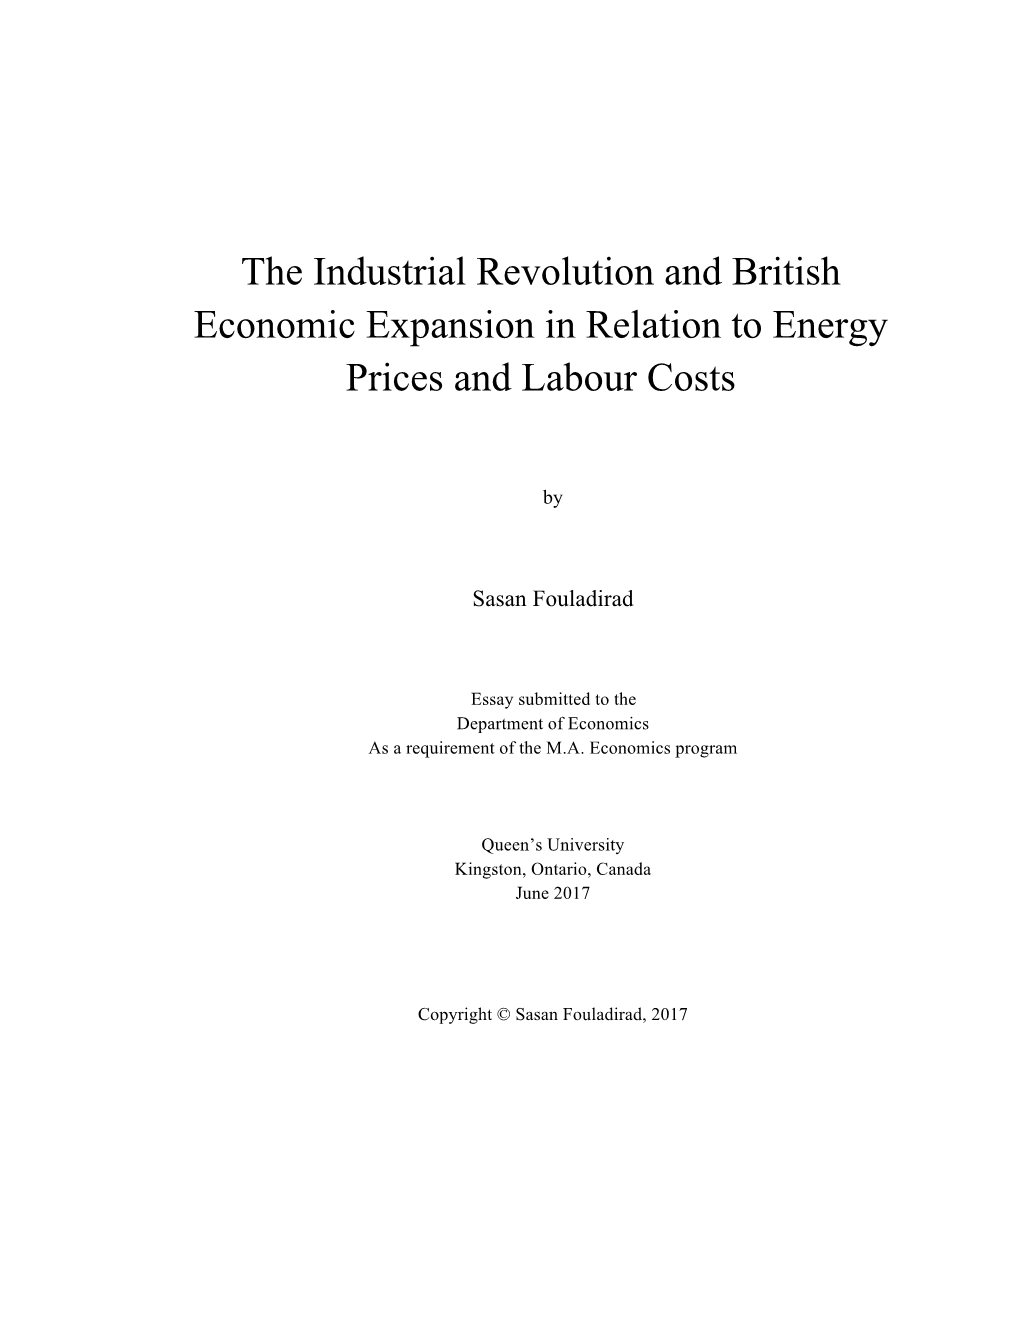 The Industrial Revolution and British Economic Expansion in Relation to Energy Prices and Labour Costs